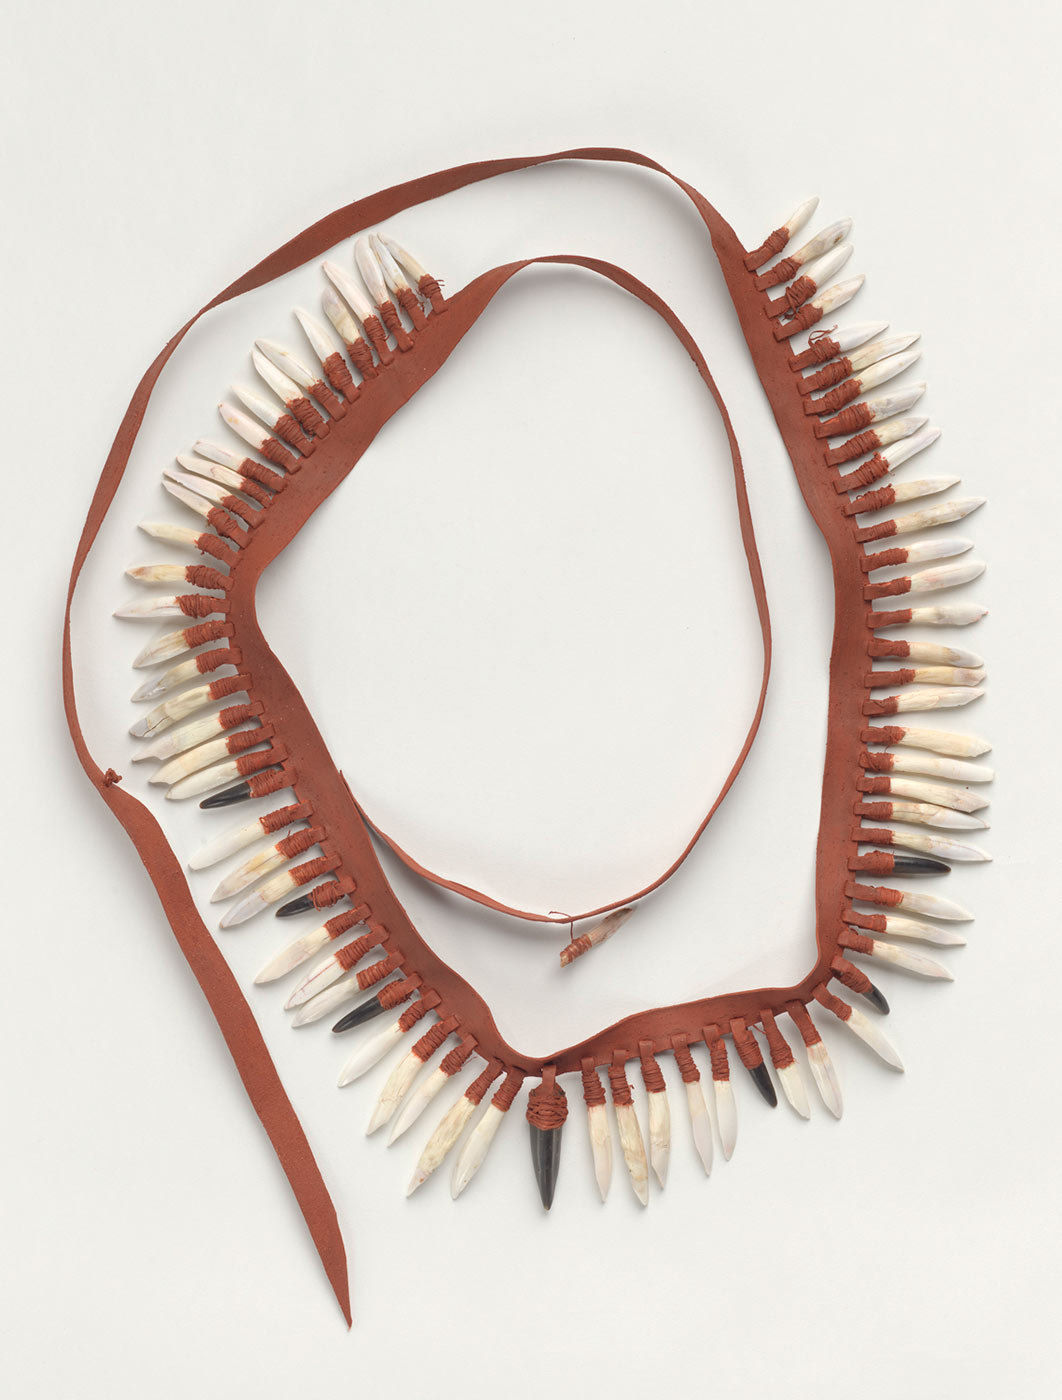 A necklace of kangaroo teeth and toes. - click to view larger image